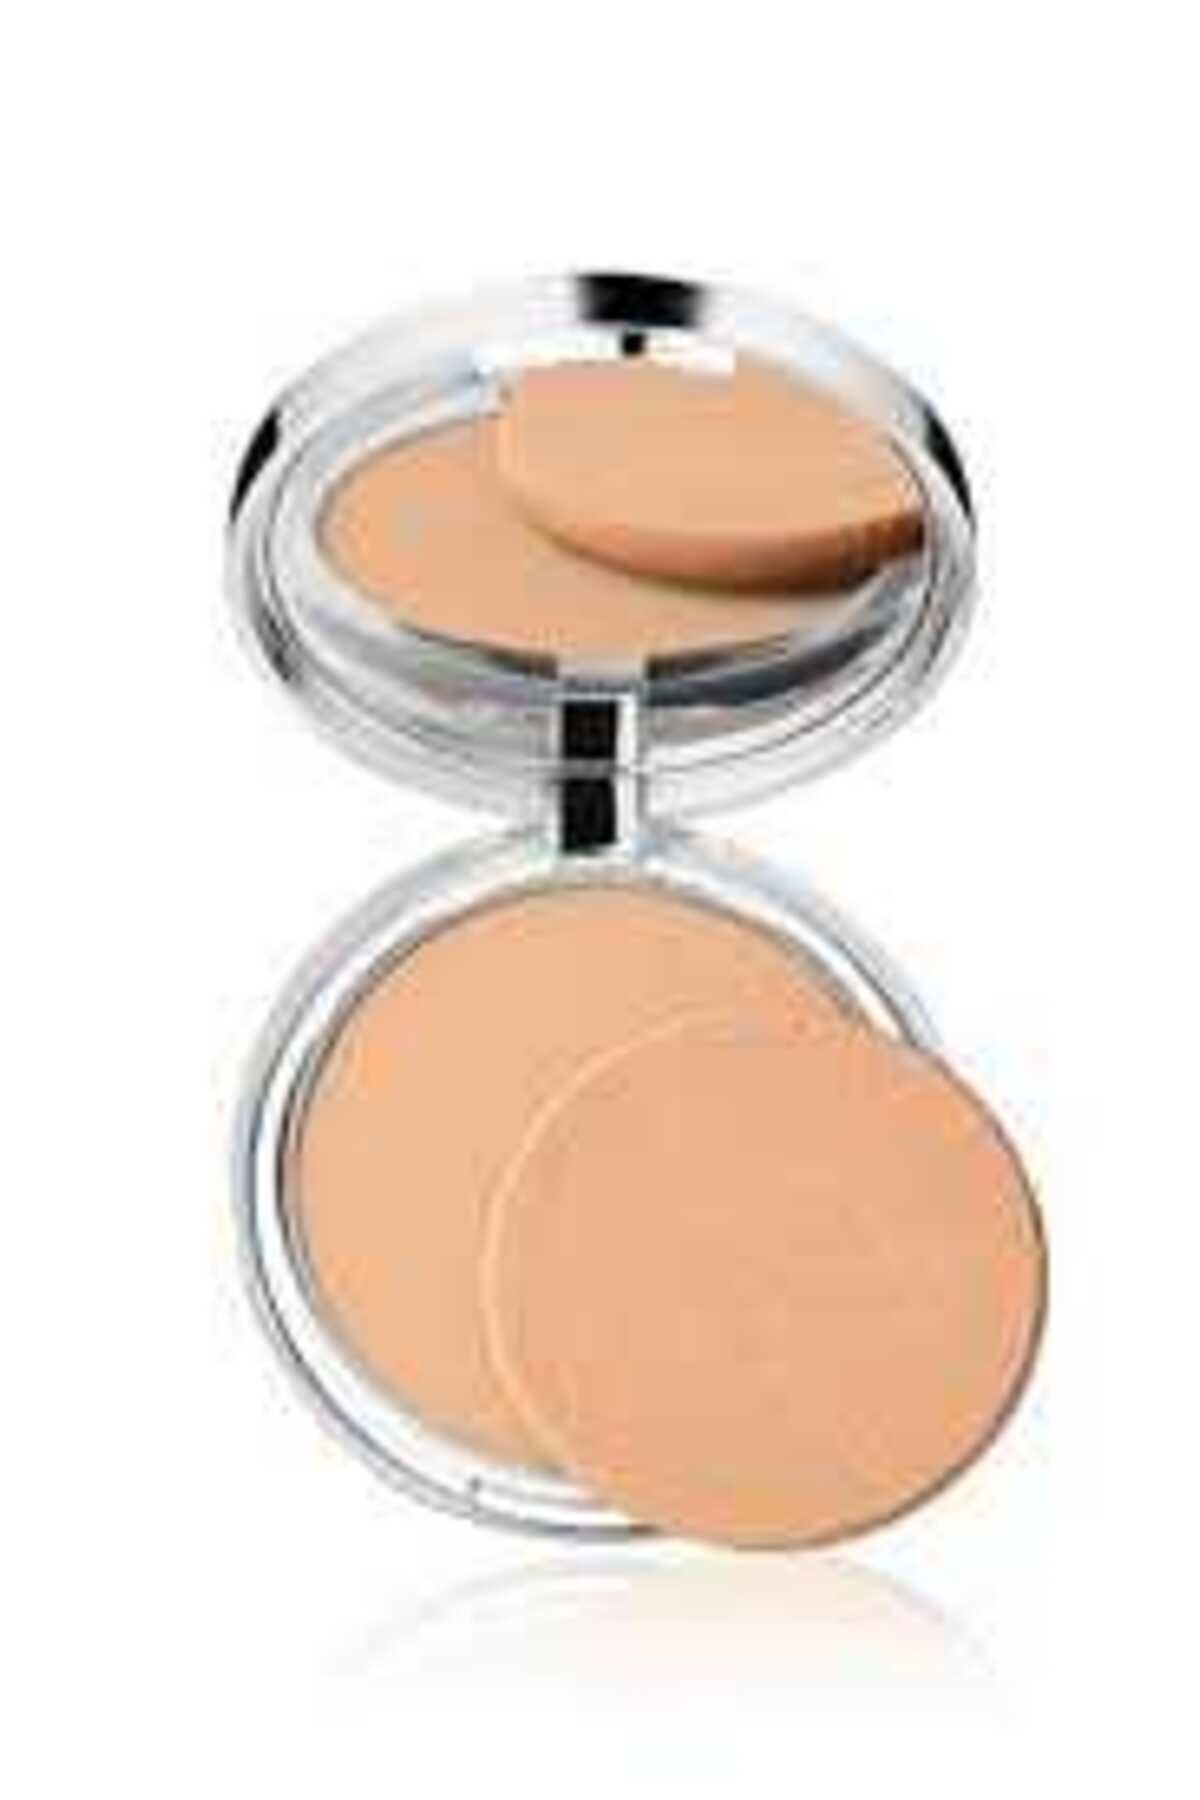 Clinique Pudra - Stay Matte Sheer Pressed Powder Stay Beige 7.6 g 020714066123